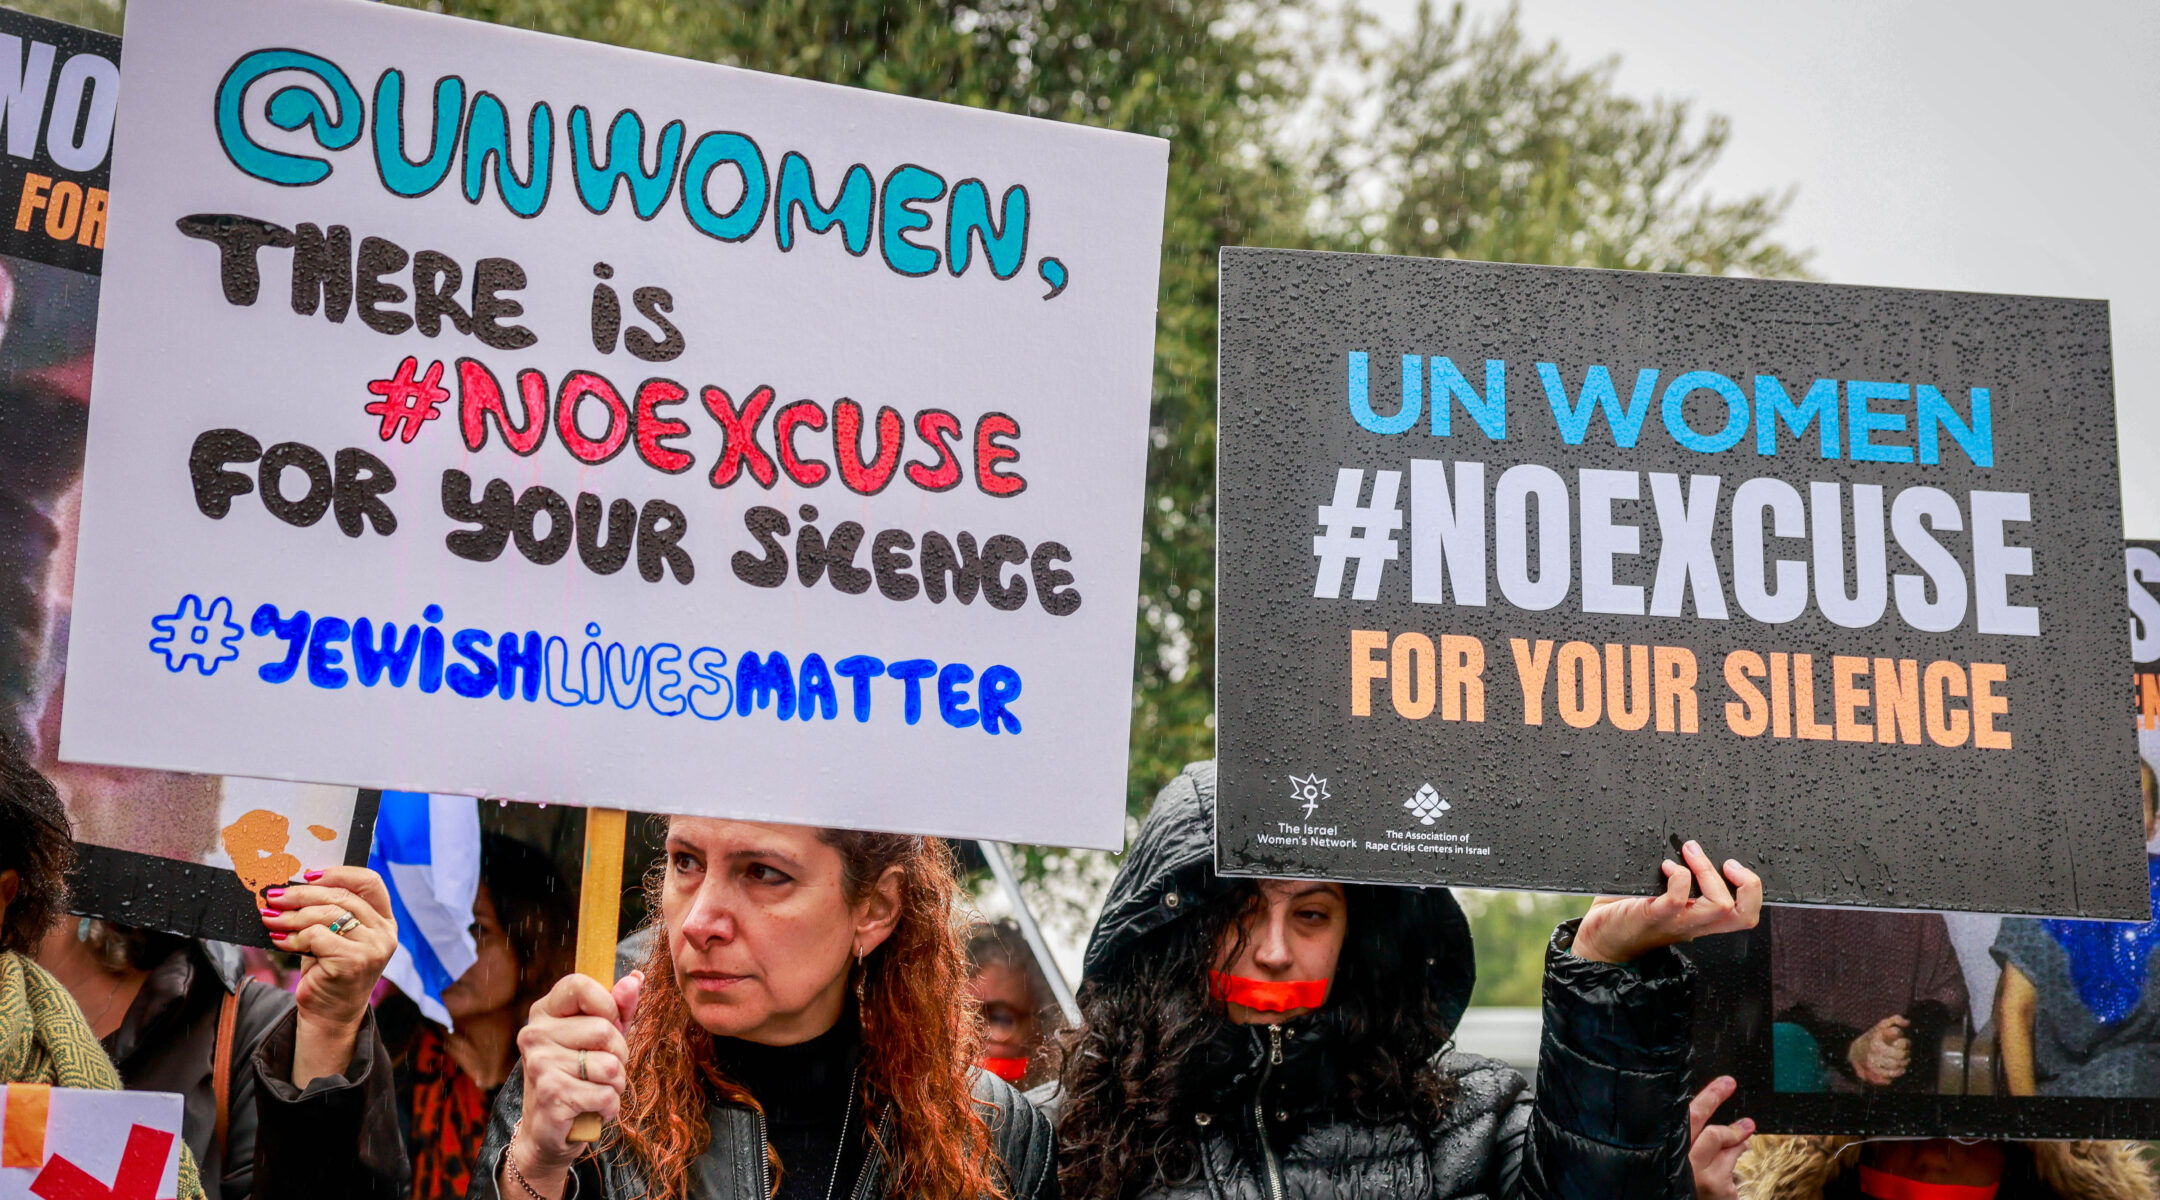 After backlash over silence, UN Women tweets, then deletes